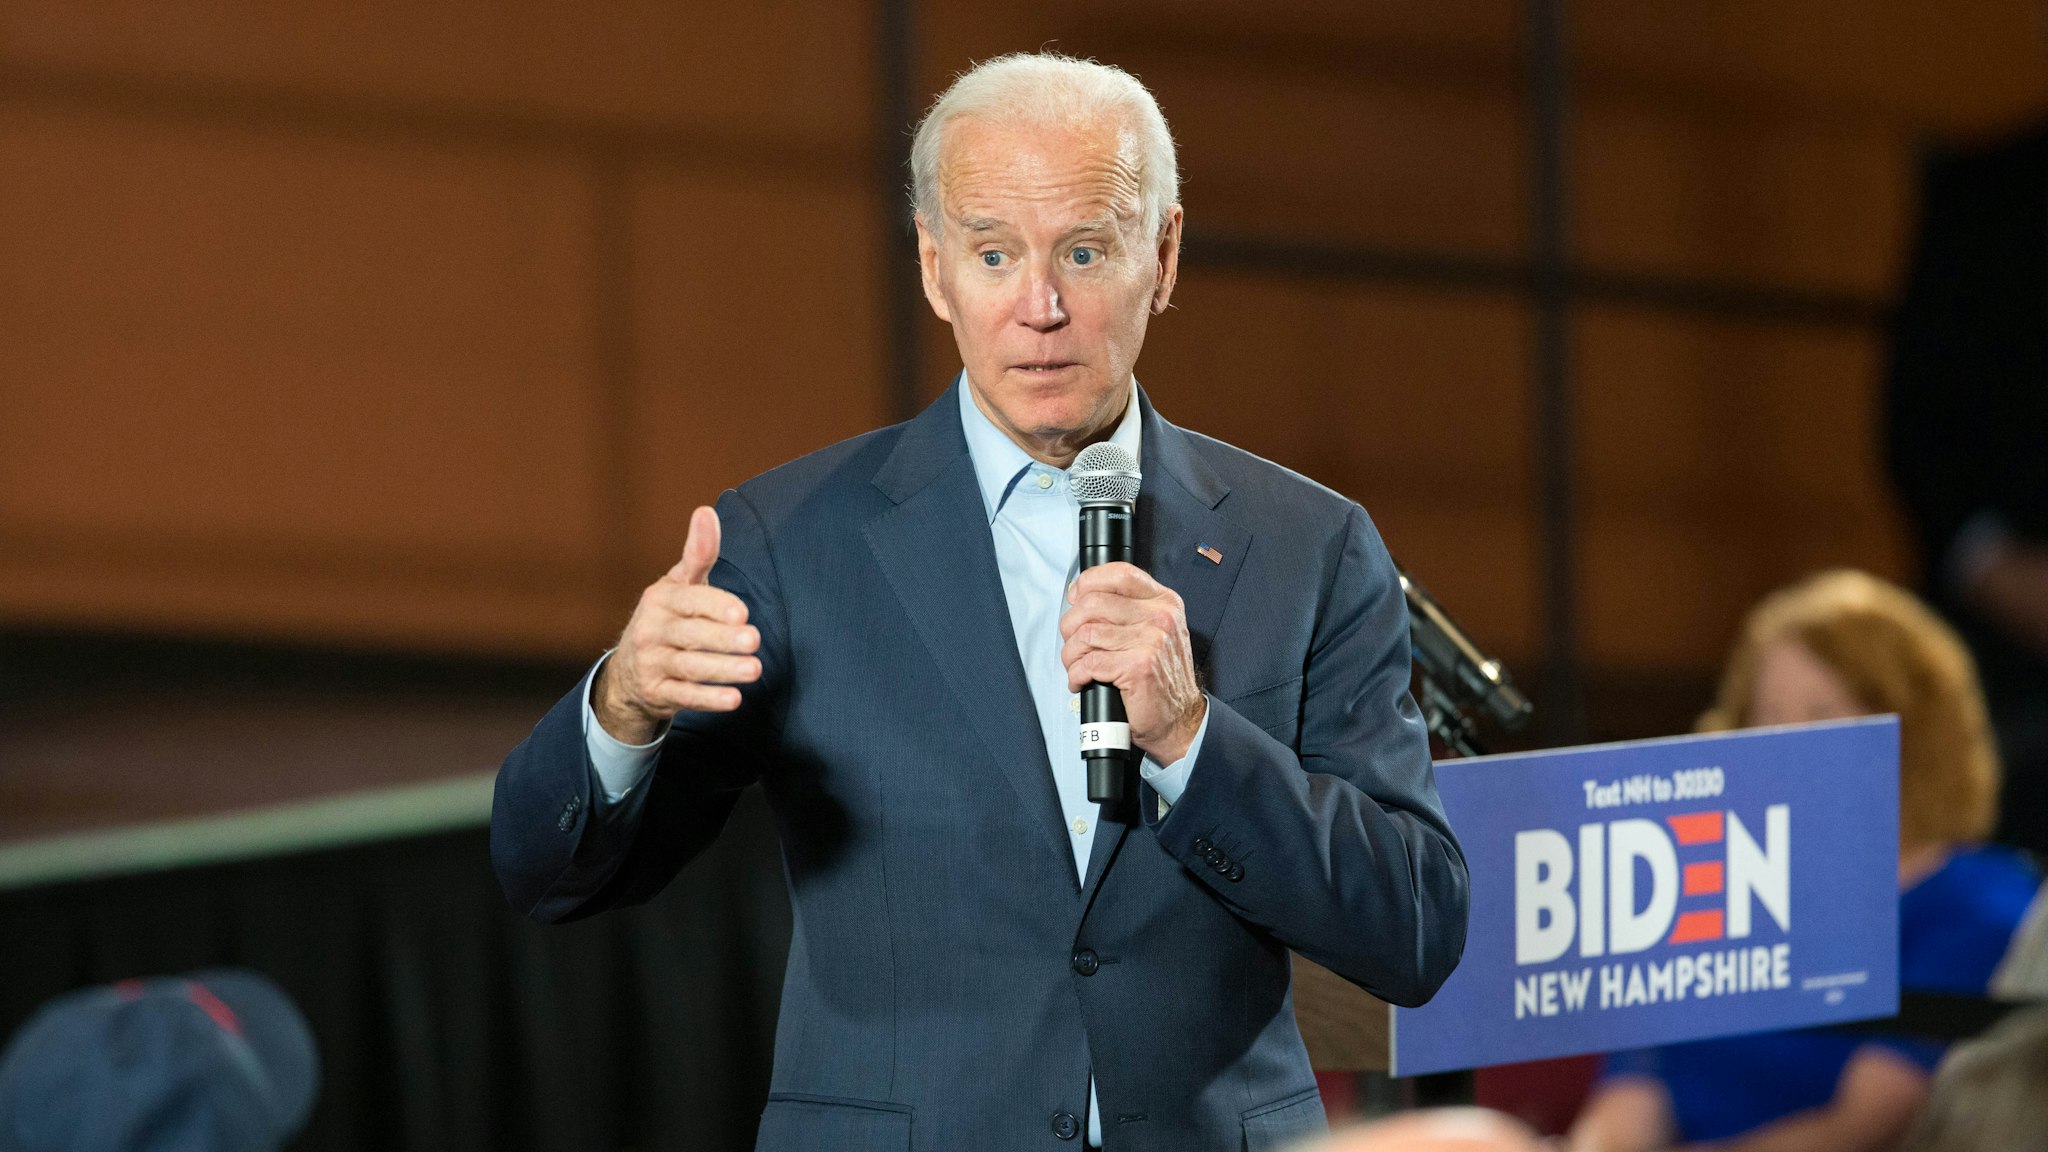 DERRY , NH - DECEMBER 30: Democratic presidential candidate, former Vice President Joe Biden speaks during a campaign Town Hall on December 30, 2019 in Derry, New Hampshire. The 2020 Iowa Democratic caucuses will take place on February 3, 2020, making it the first nominating contest for the Democratic Party in choosing their presidential candidate to face Donald Trump in the 2020 election.